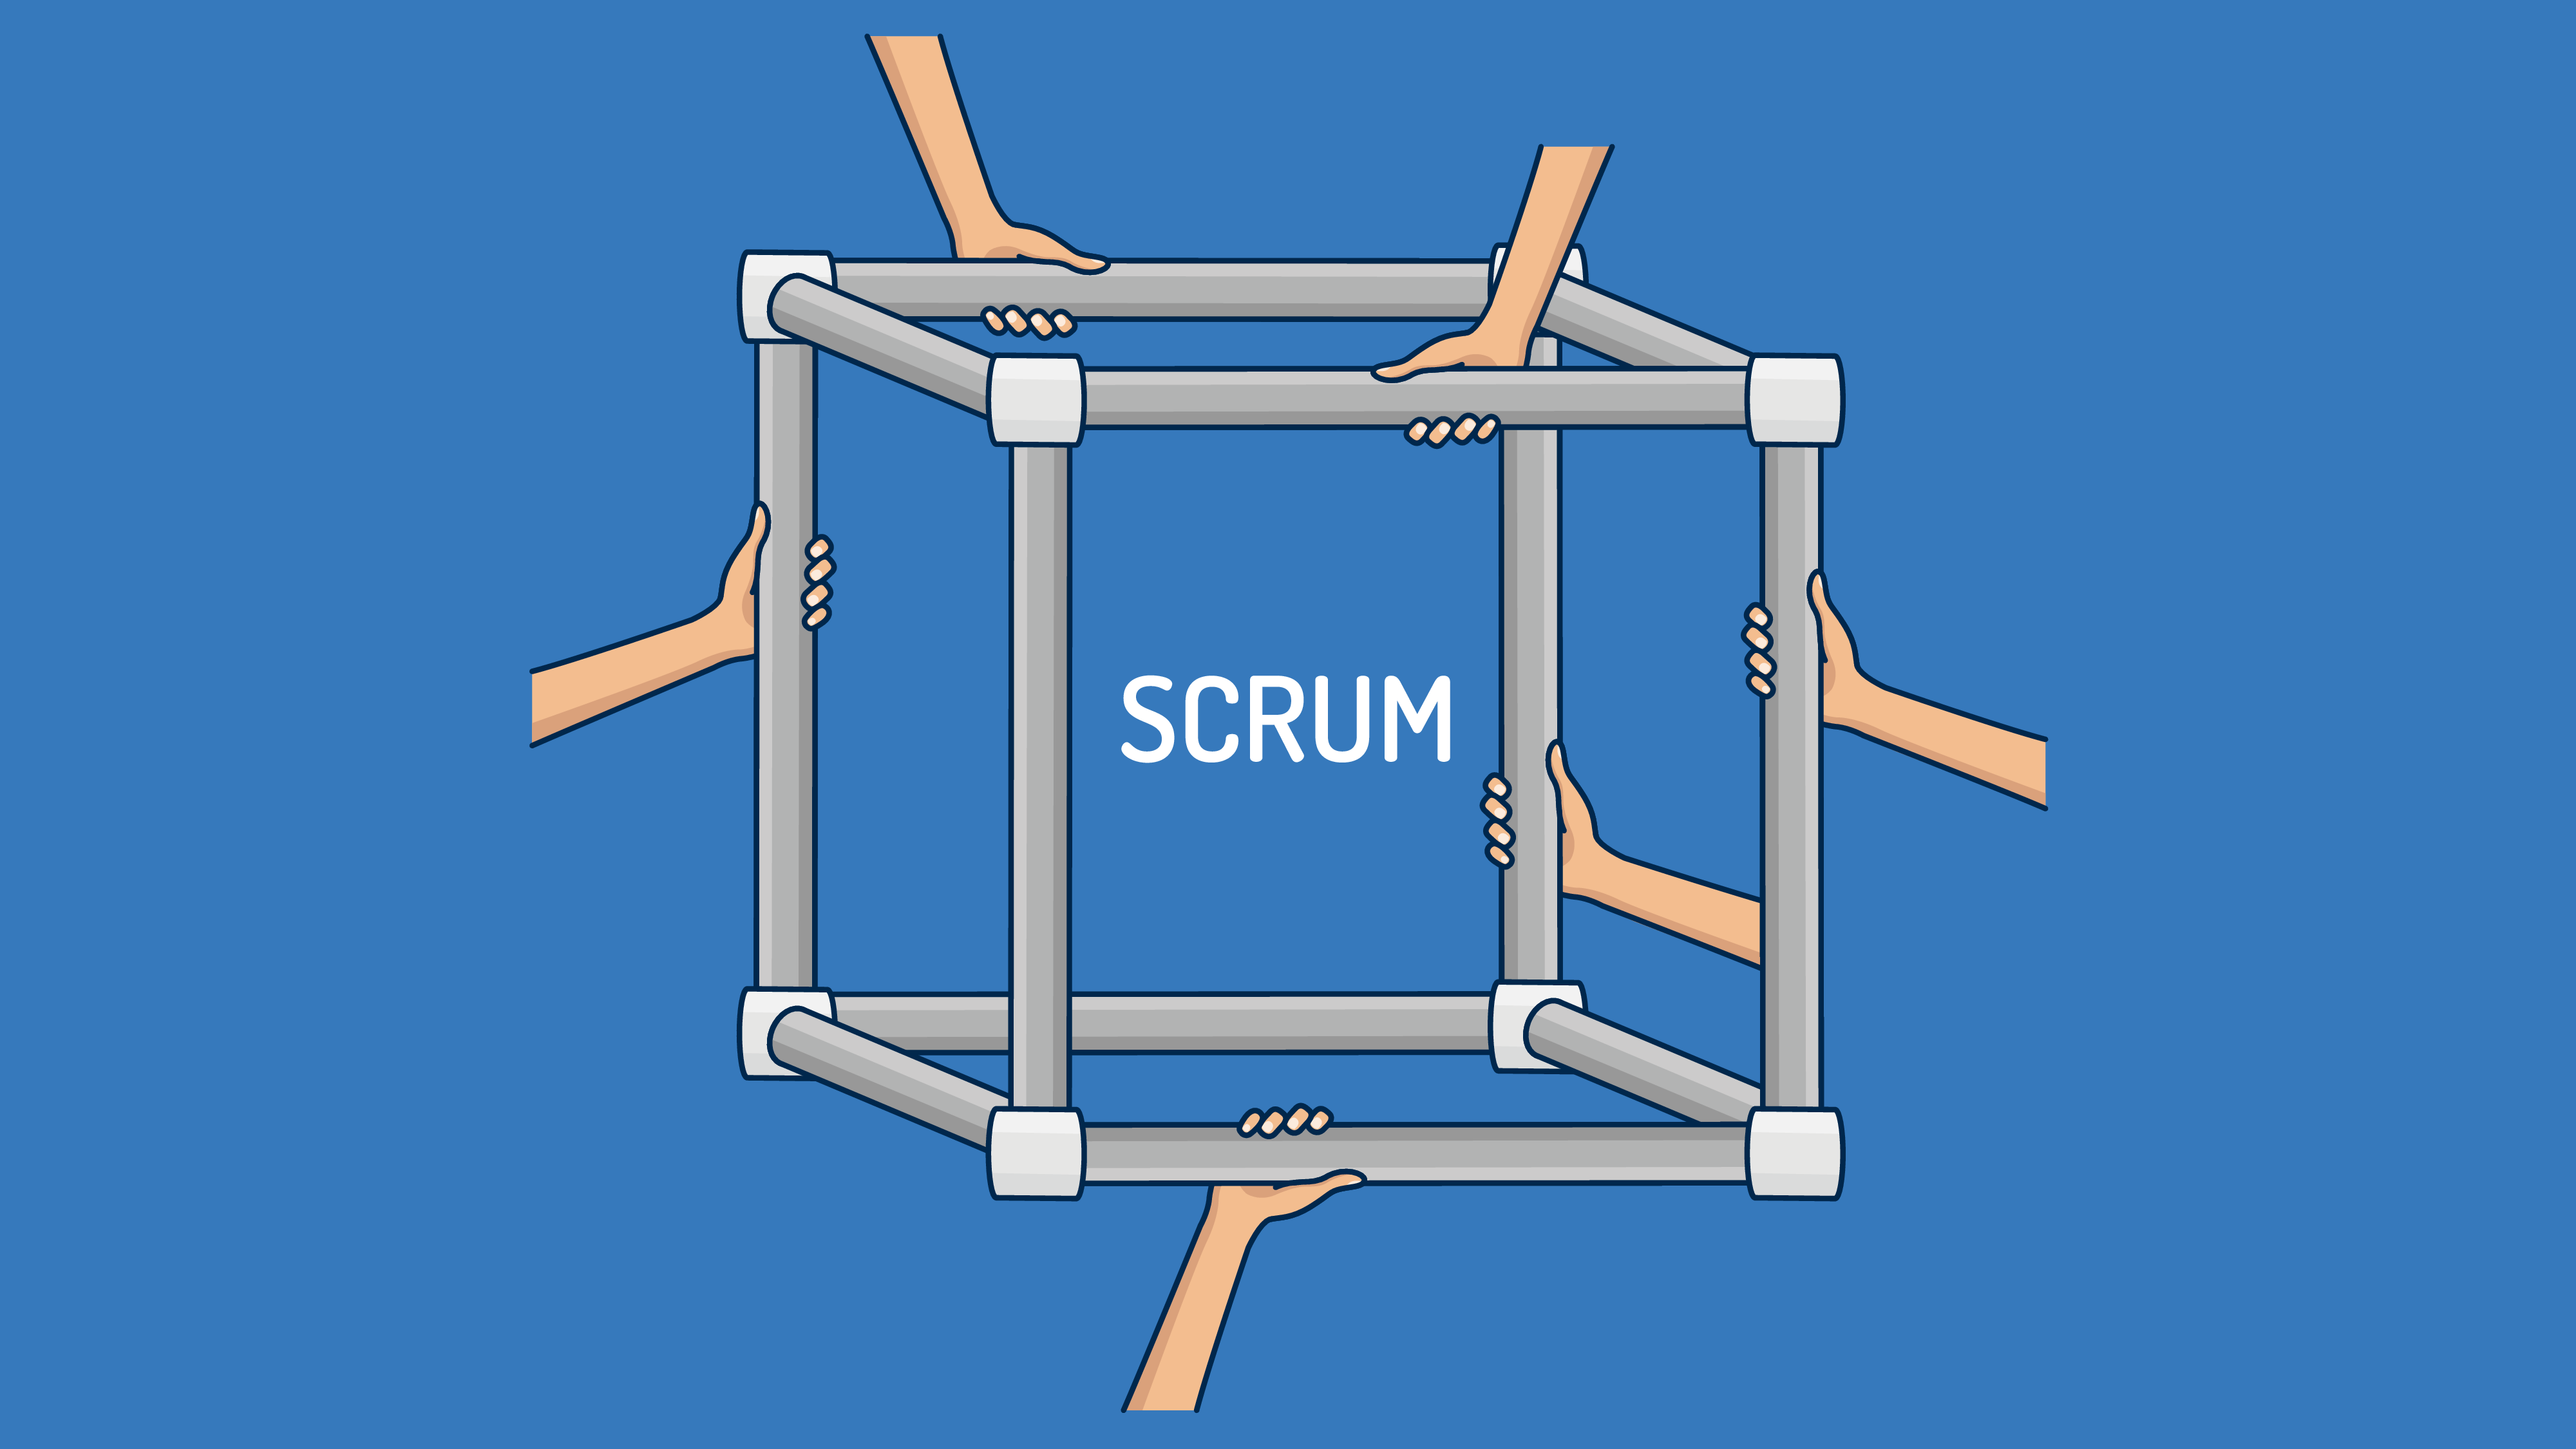 The Scrum framework is deliberately incomplete, as represented by a cube made up of structural rods, each held in a Scrum team member's hand.